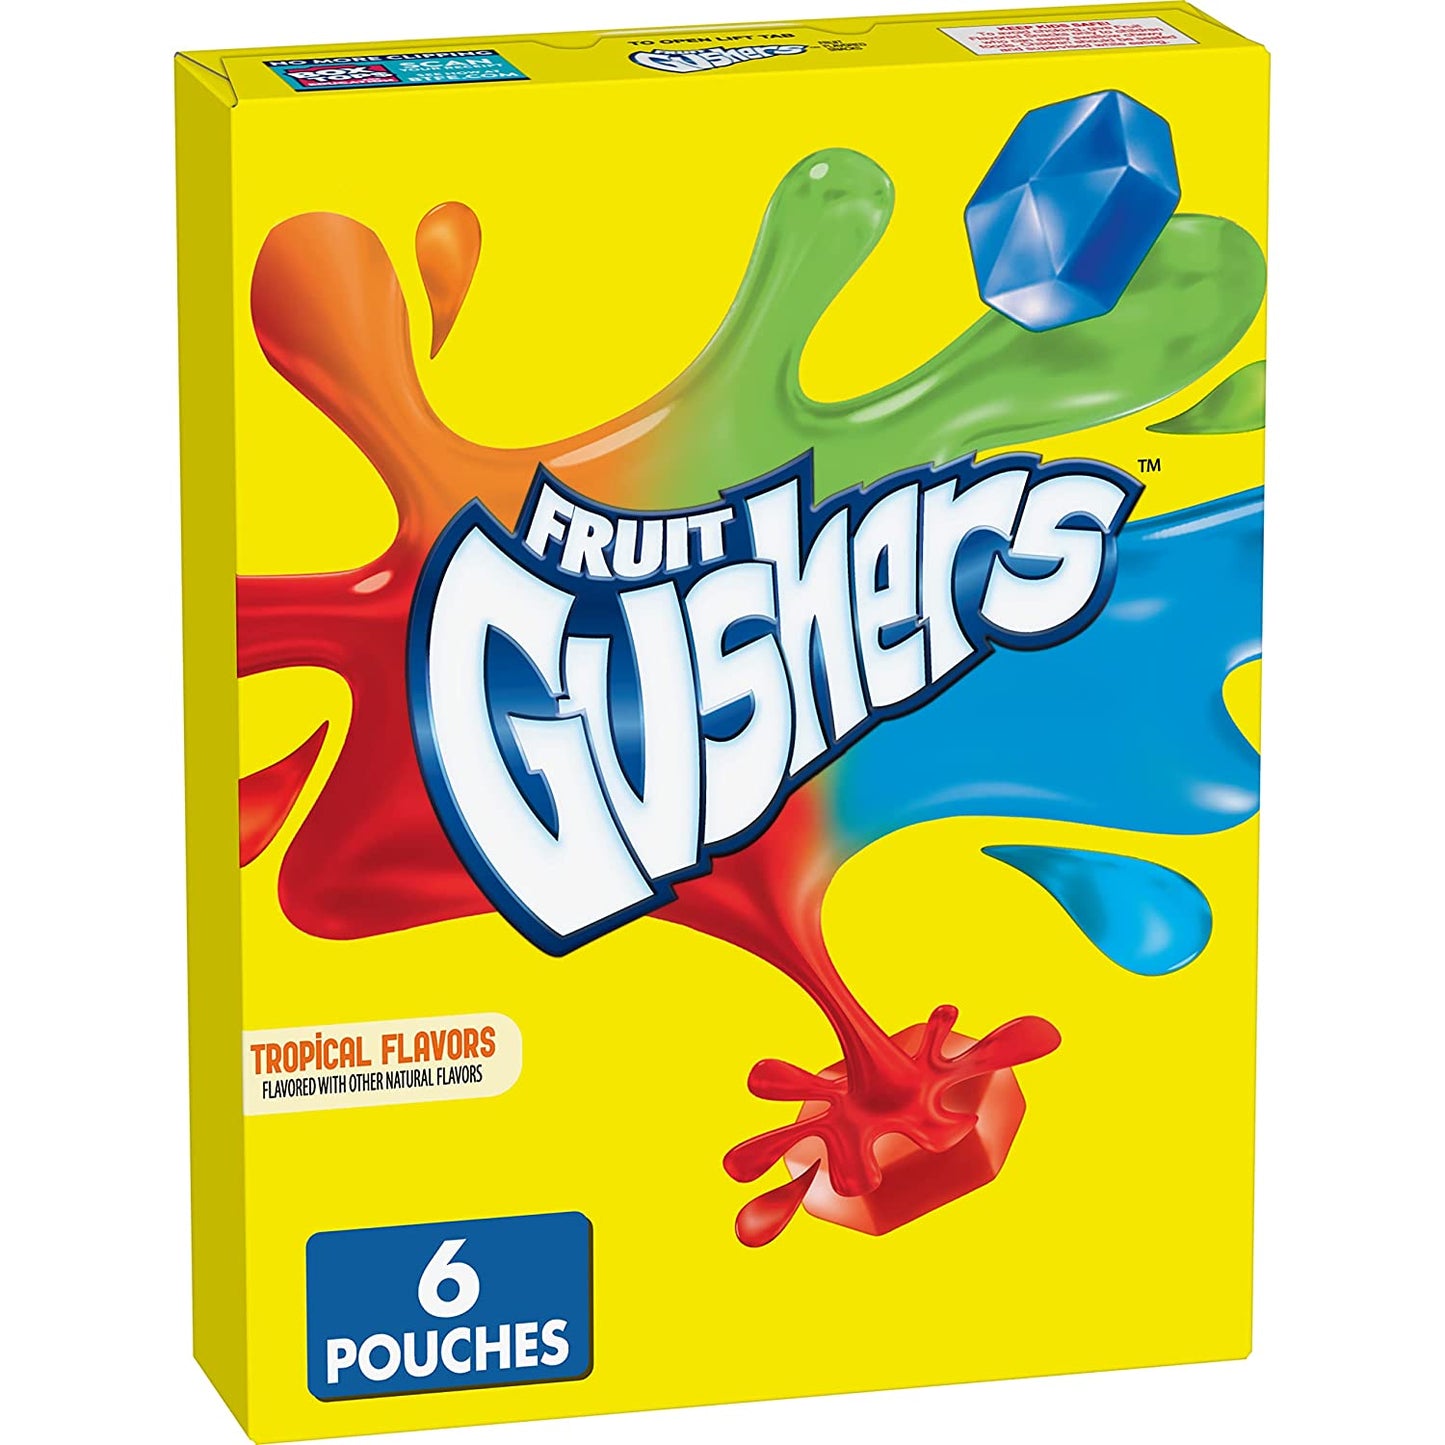 Gushers Fruit Flavored Snacks, Tropical, Gluten Free, 0.8 oz, 6 ct